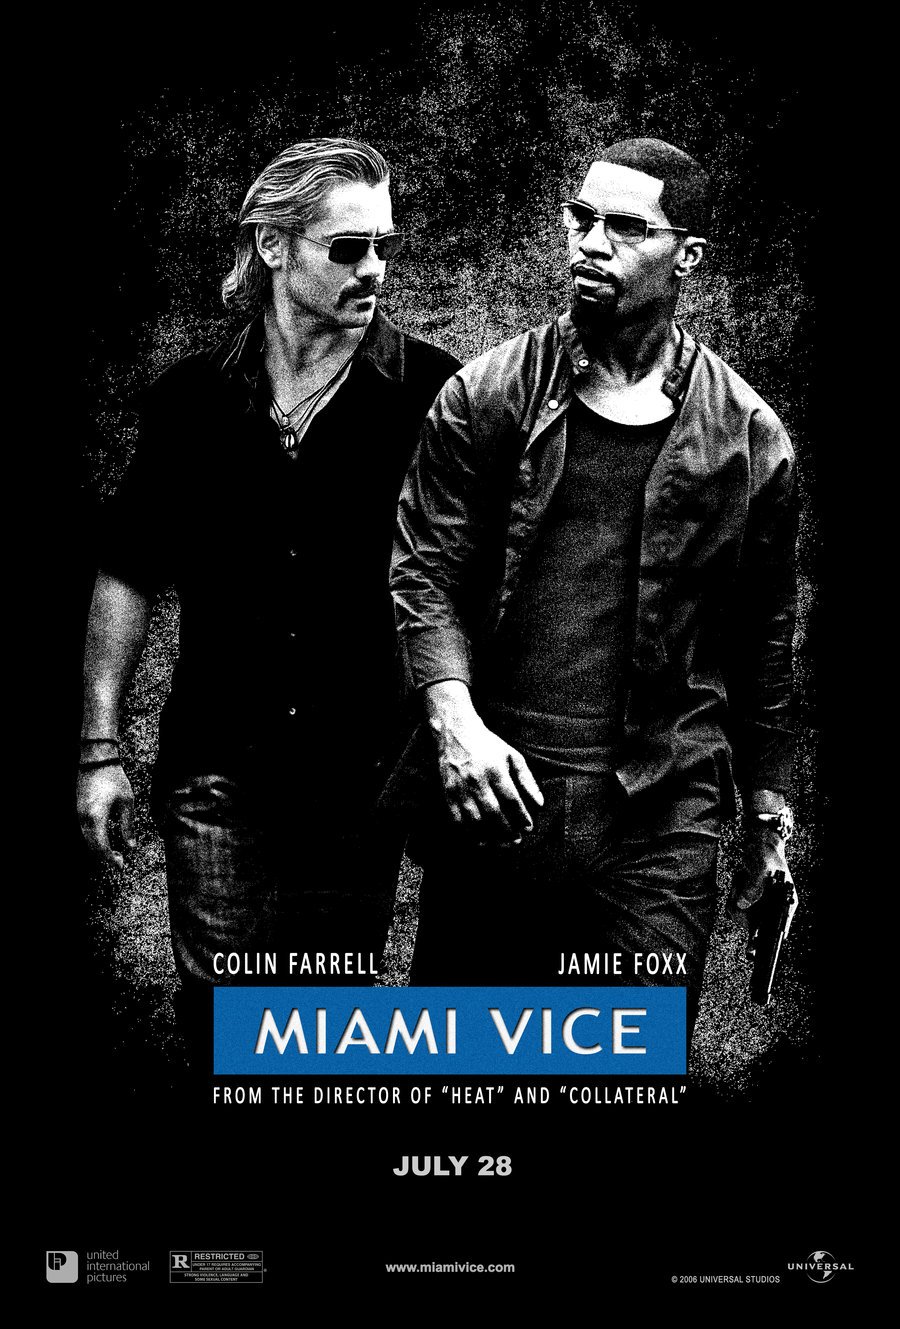 Miami Vice released in July 2006 - HeadStuff.org